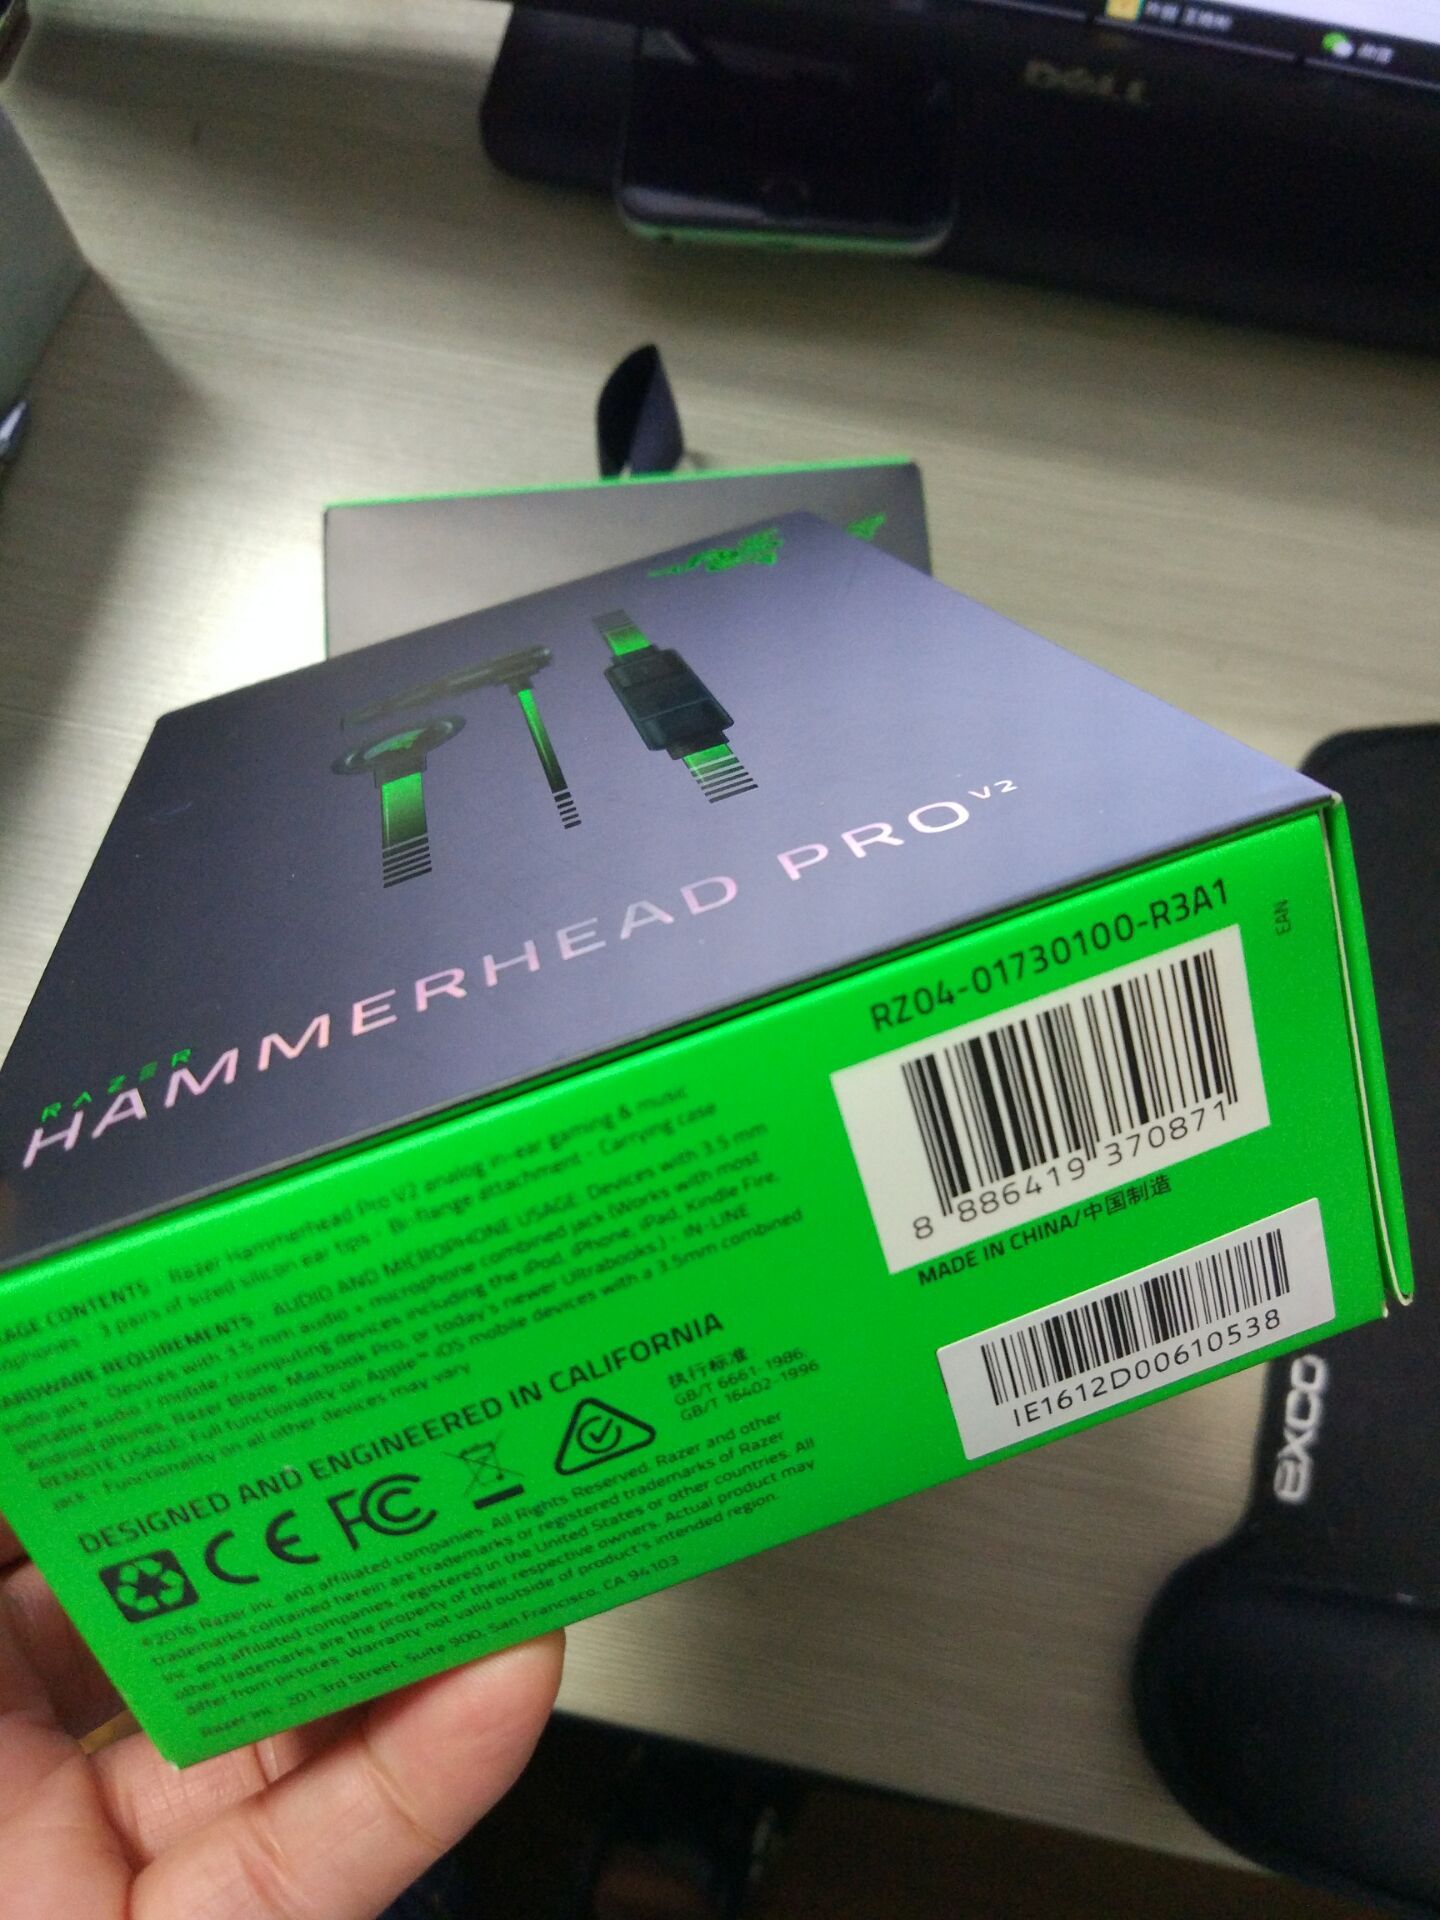 Razer Hammerhead Pro V2 Earphone With Microphone With Retail Box In Ear Gaming Headsets Noise Isolation Stereo Bass 3 5mm Fast Dhl Headphone Bluetooth Headphones For Tv From Bluesky99 17 09 Dhgate Com